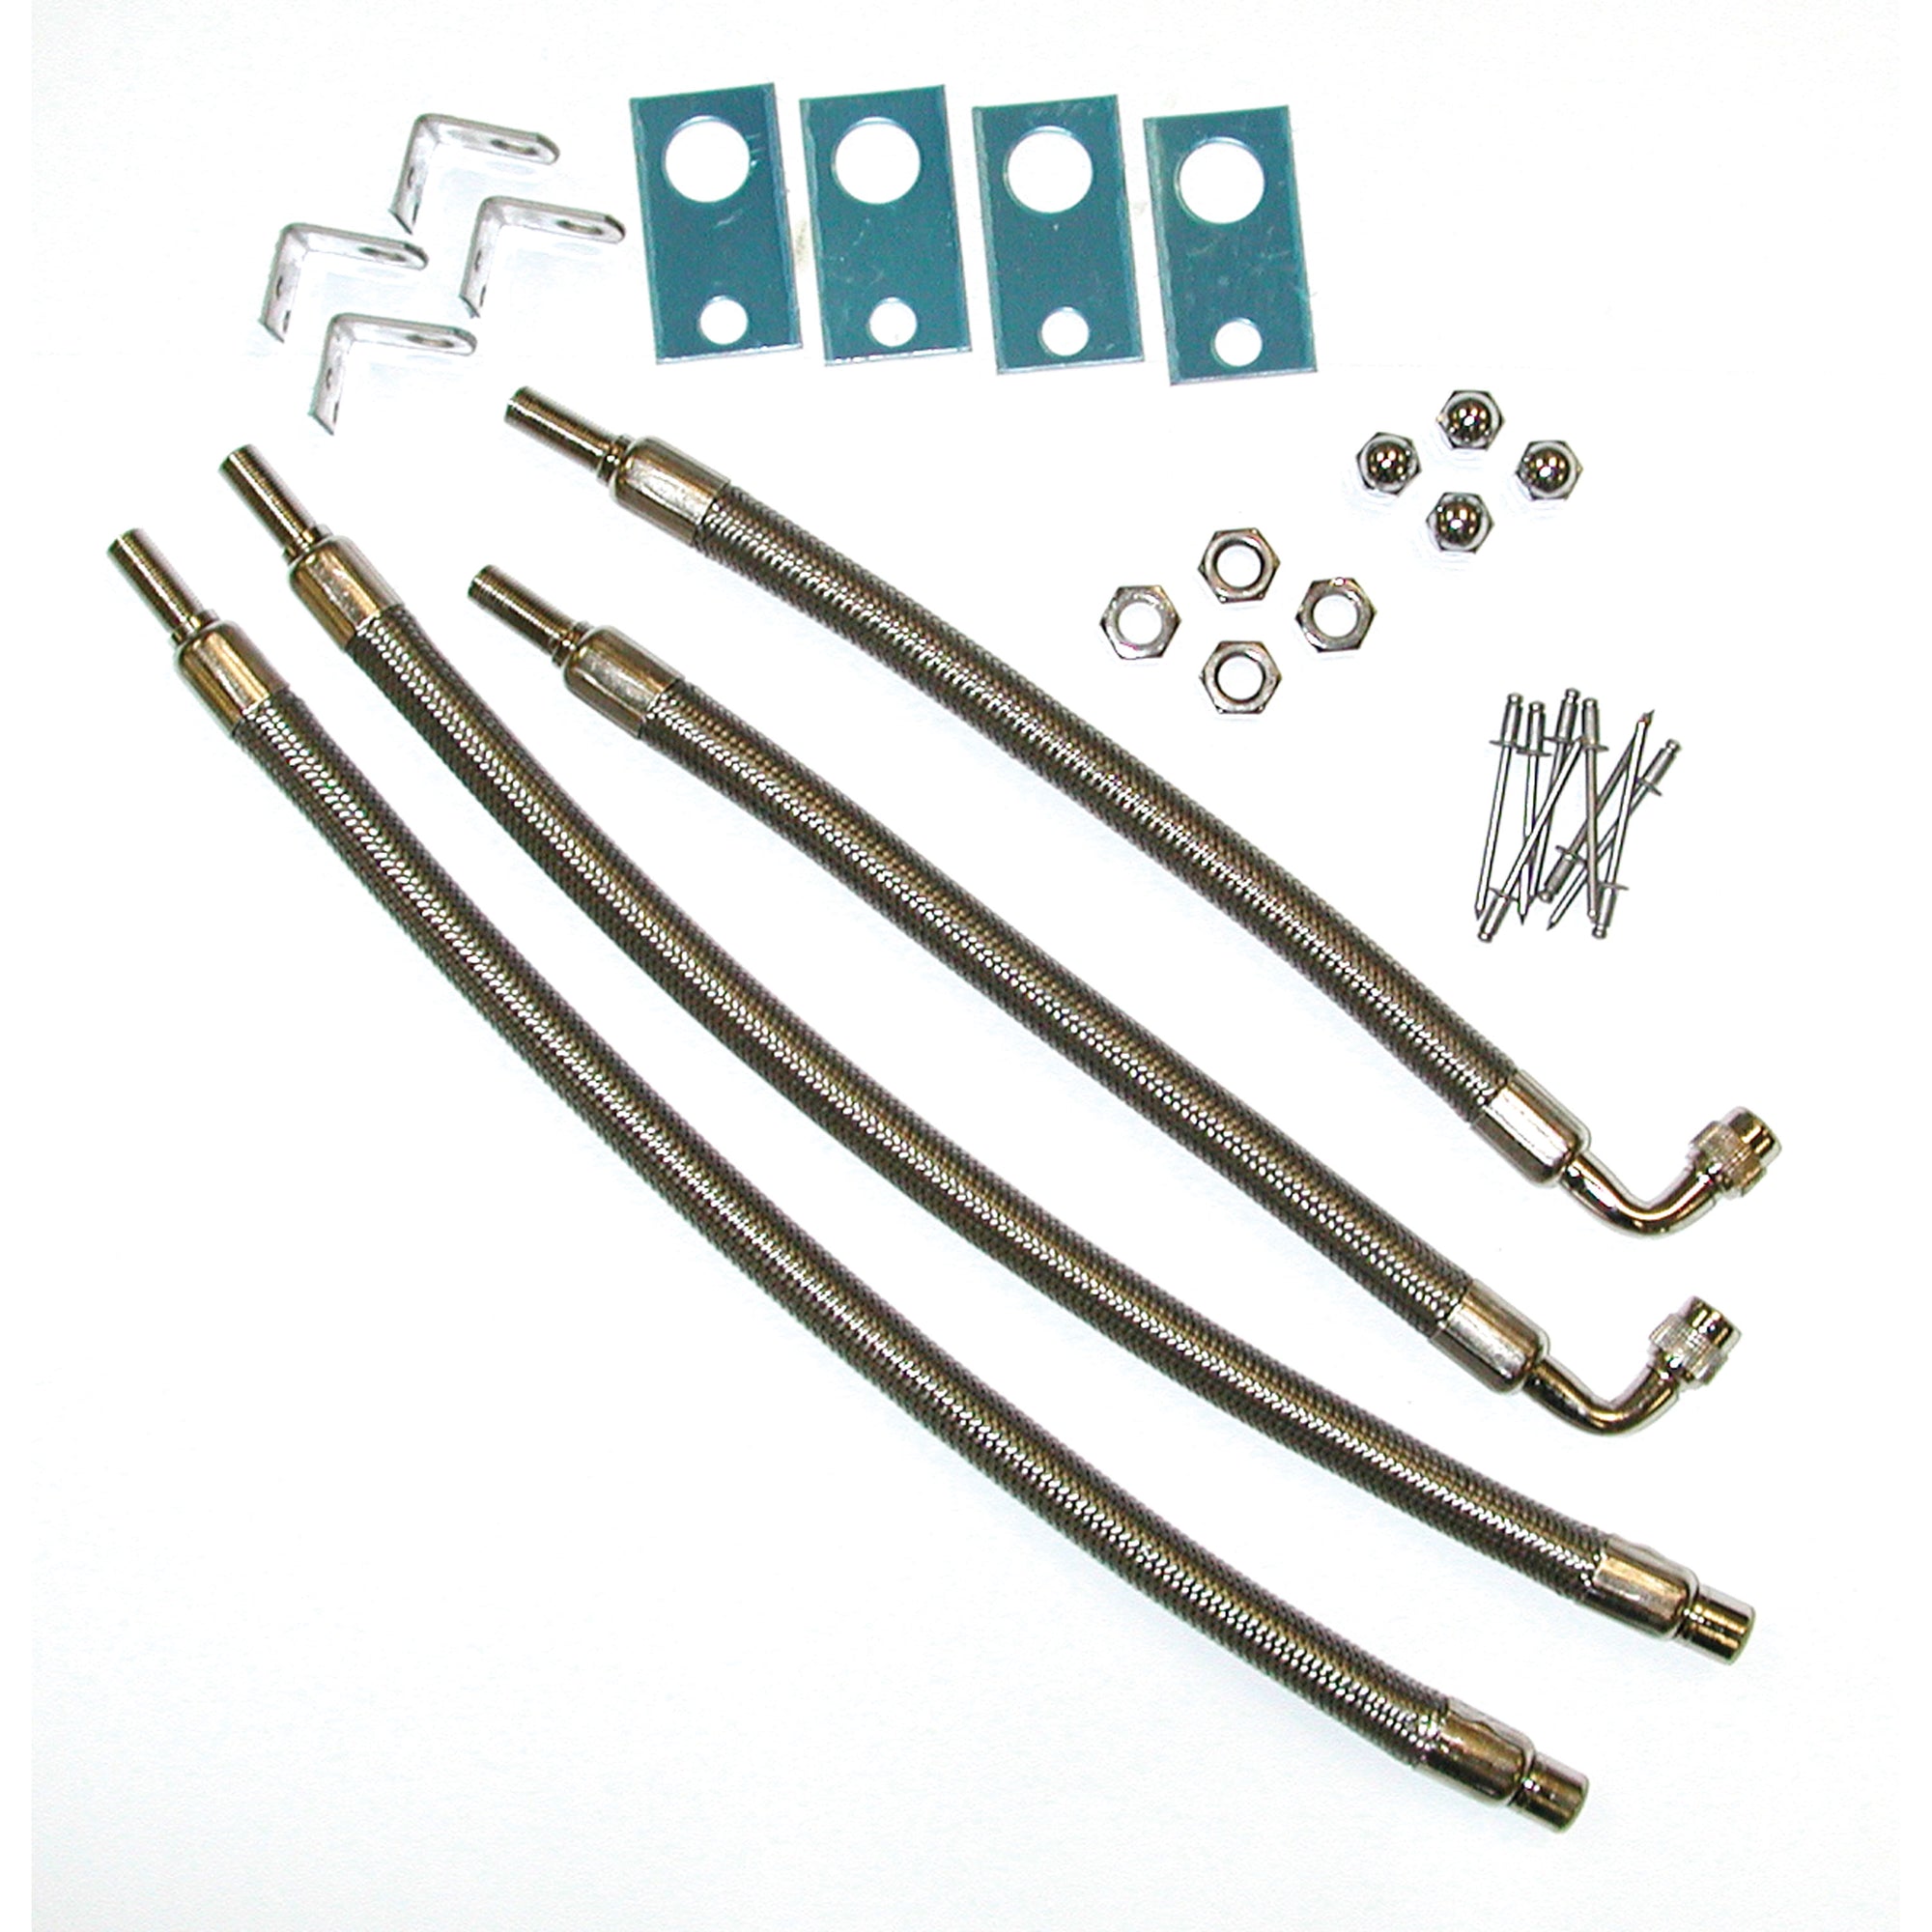 Wheel Masters 8001 AM4 Hose Extenders For 16"-19.5" Wheel Liners & Covers - 4 Hose Kit, Hand Hole Mount